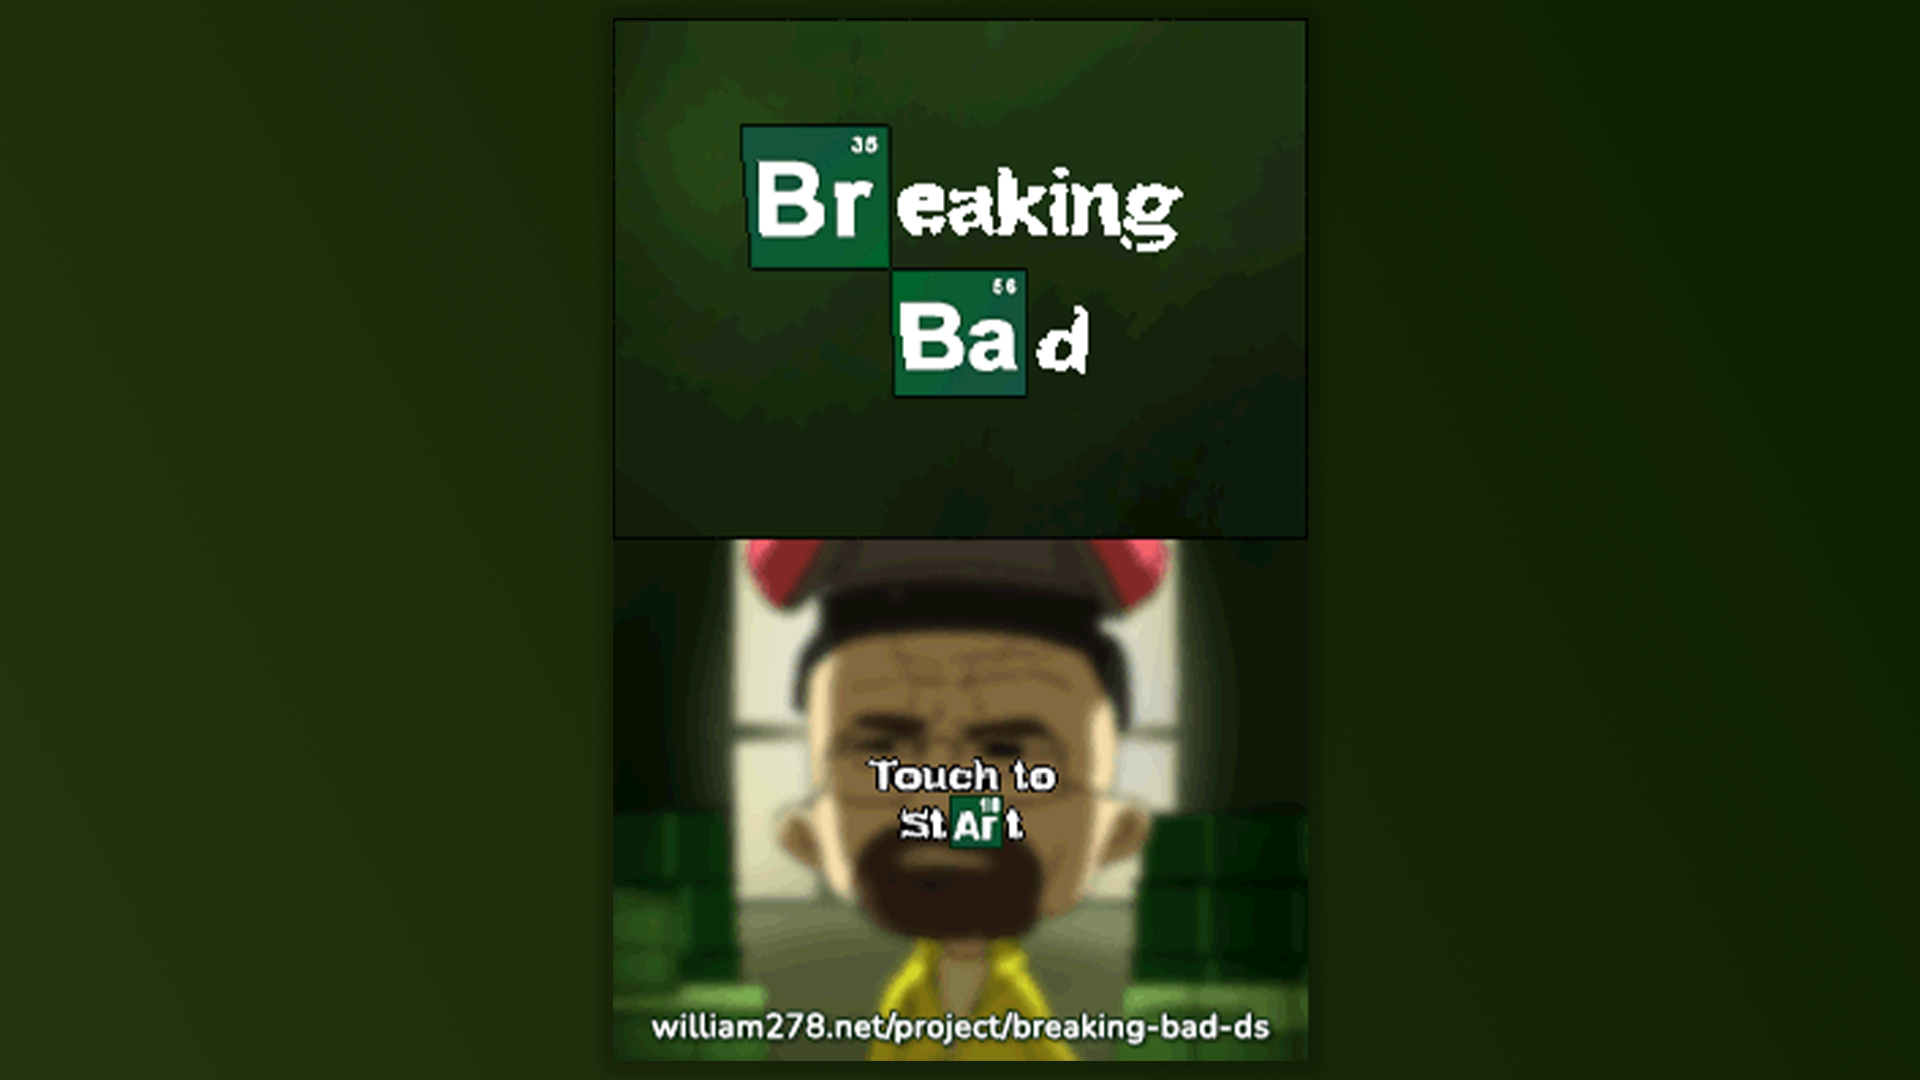 The title screen, with the Breaking Bad logo